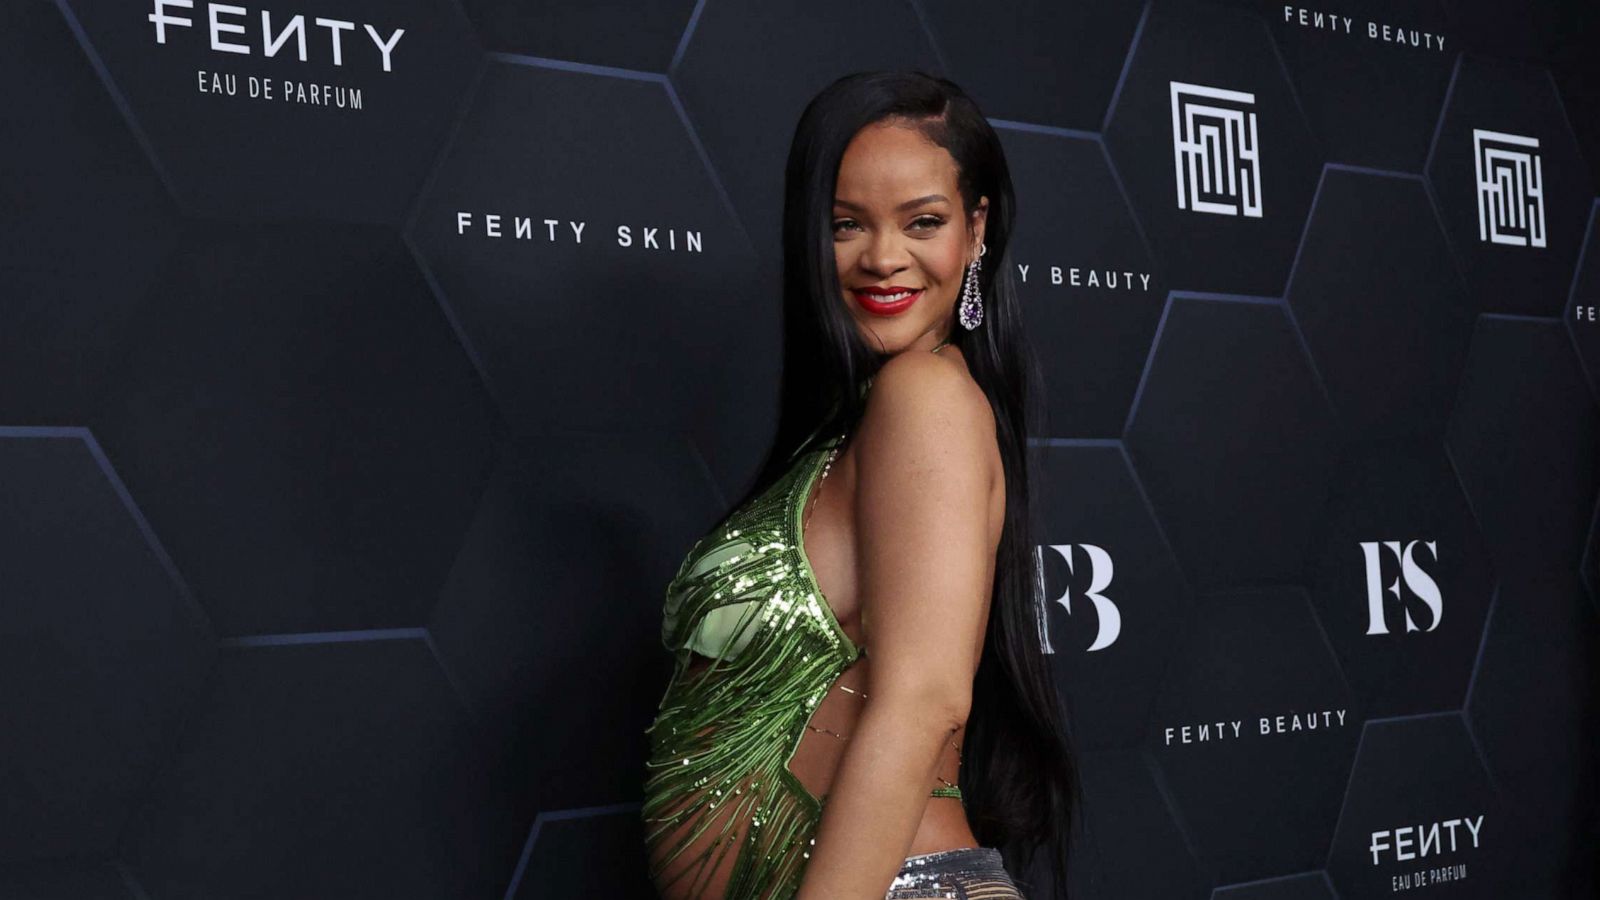 Rihanna opens up about her pregnancy, says it didn't feel 'real' at first -  ABC News